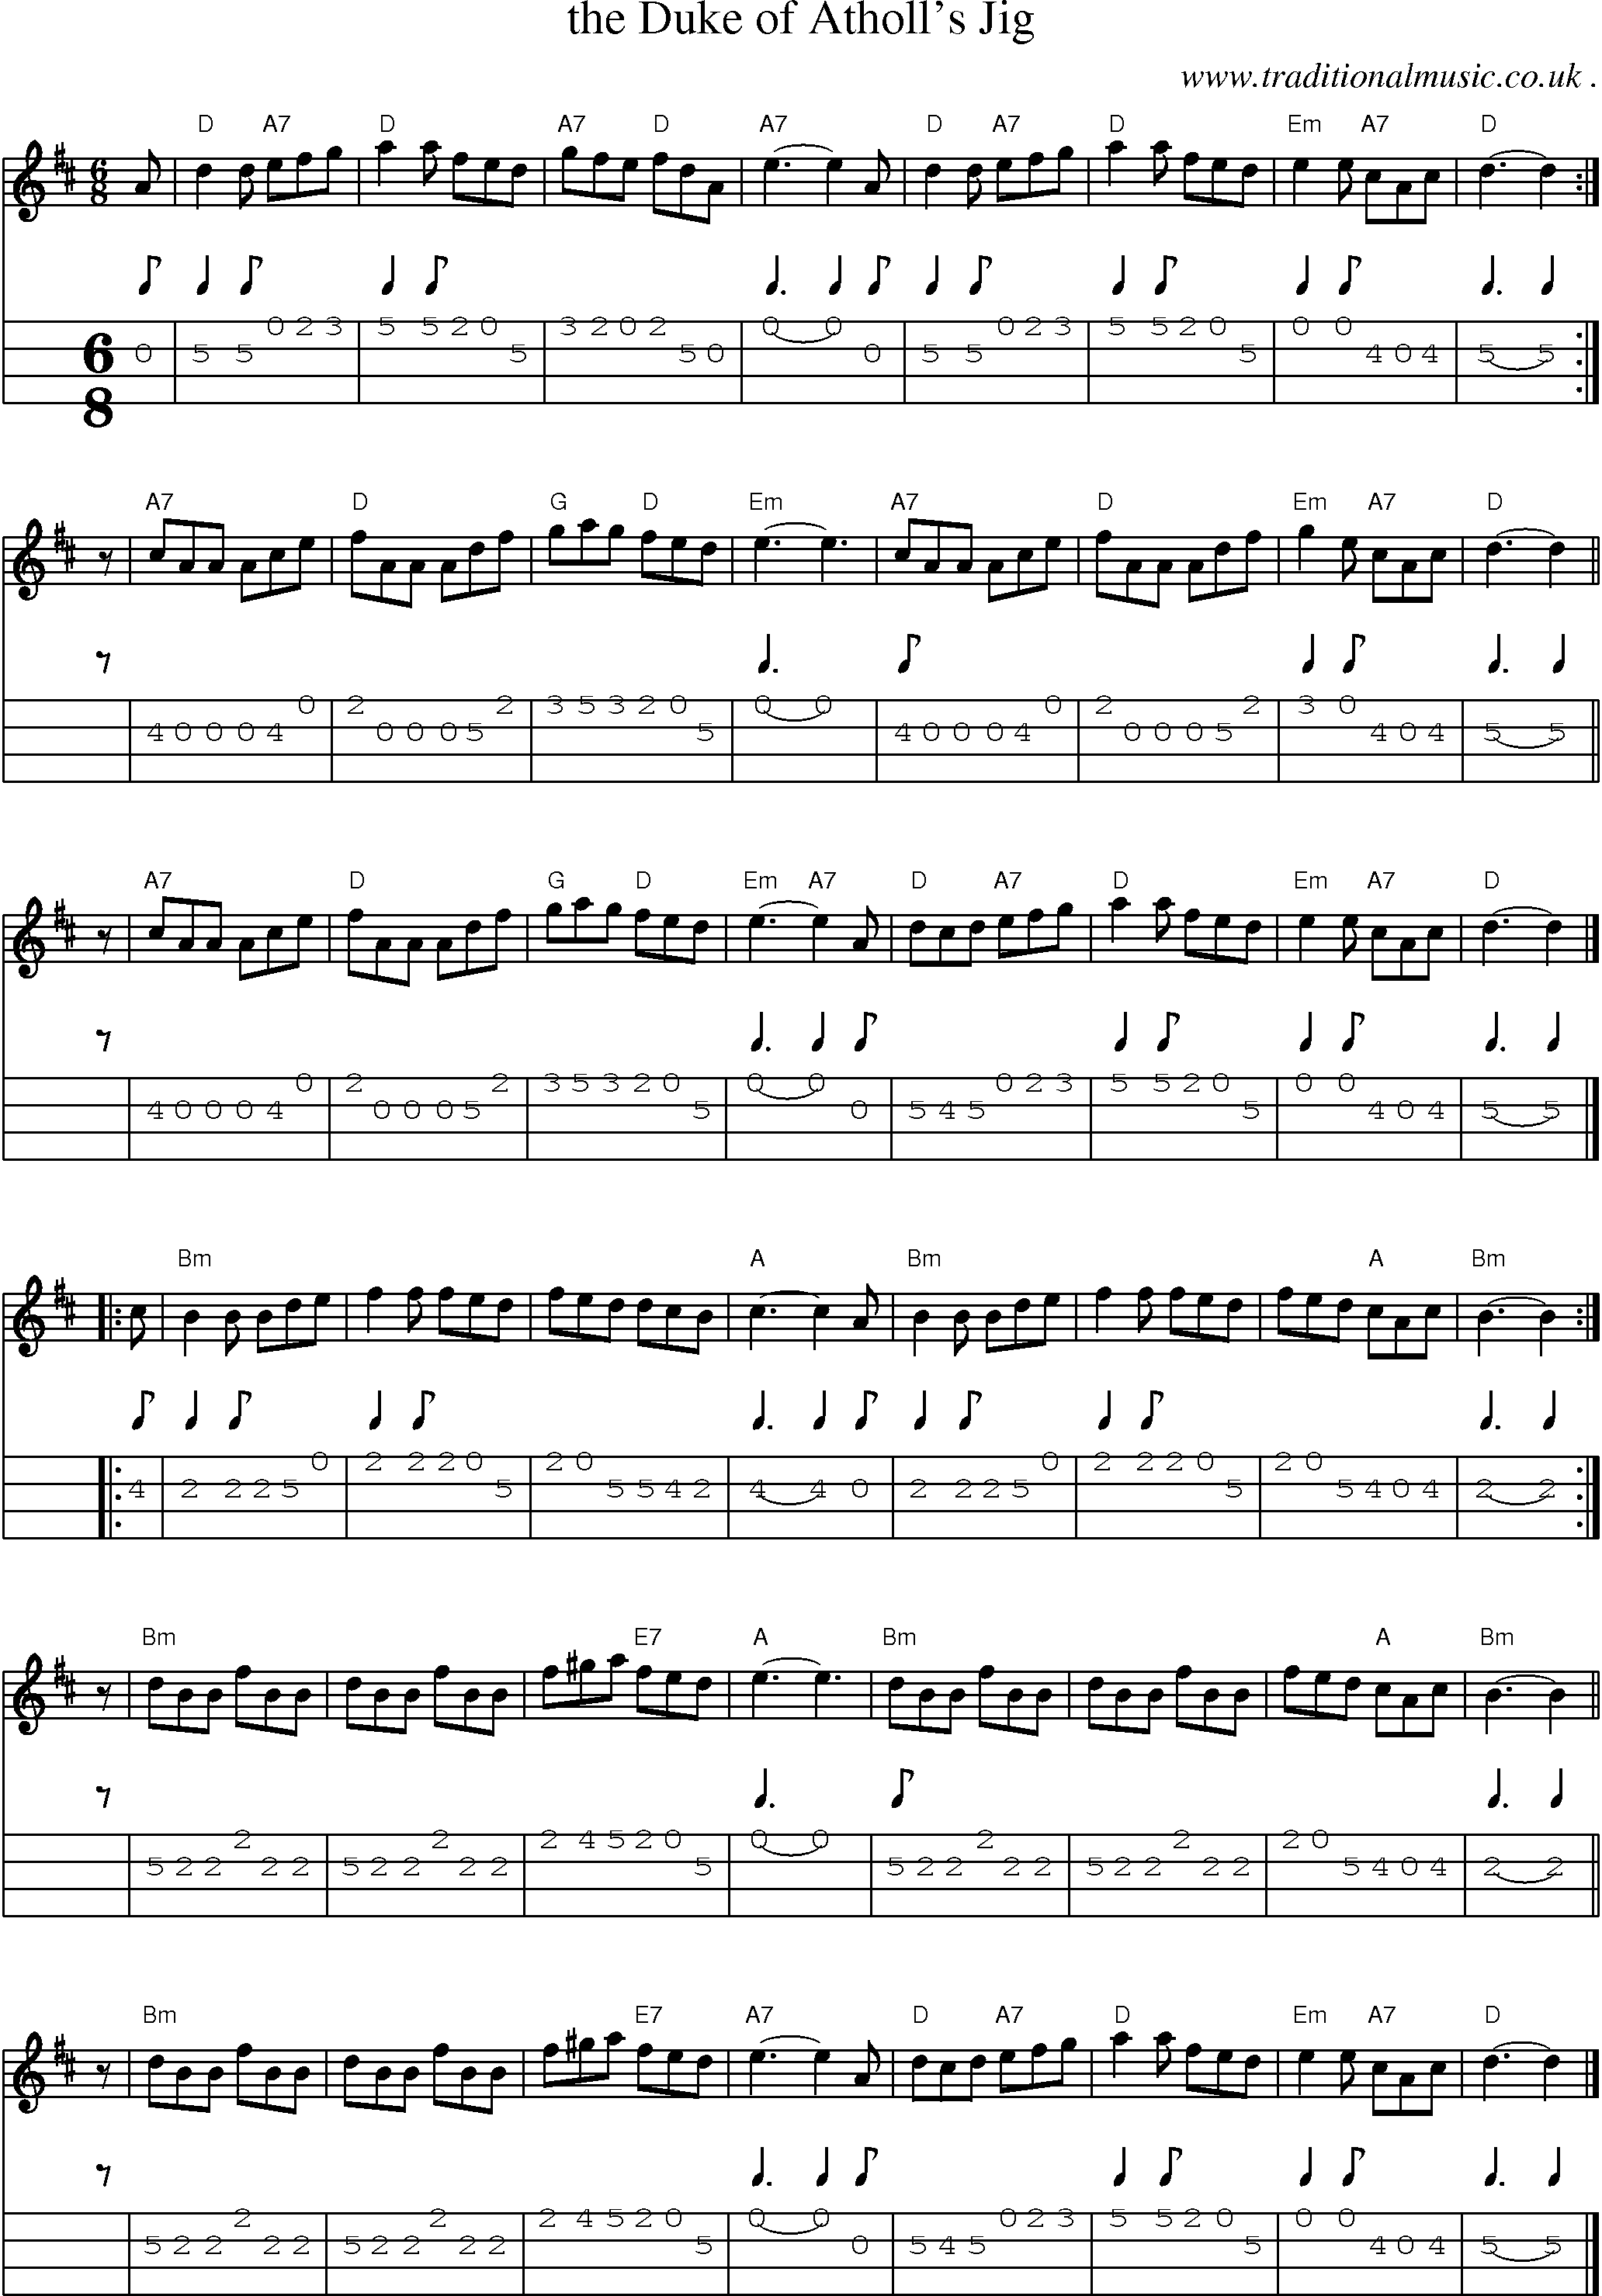 Sheet-music  score, Chords and Mandolin Tabs for The Duke Of Atholls Jig